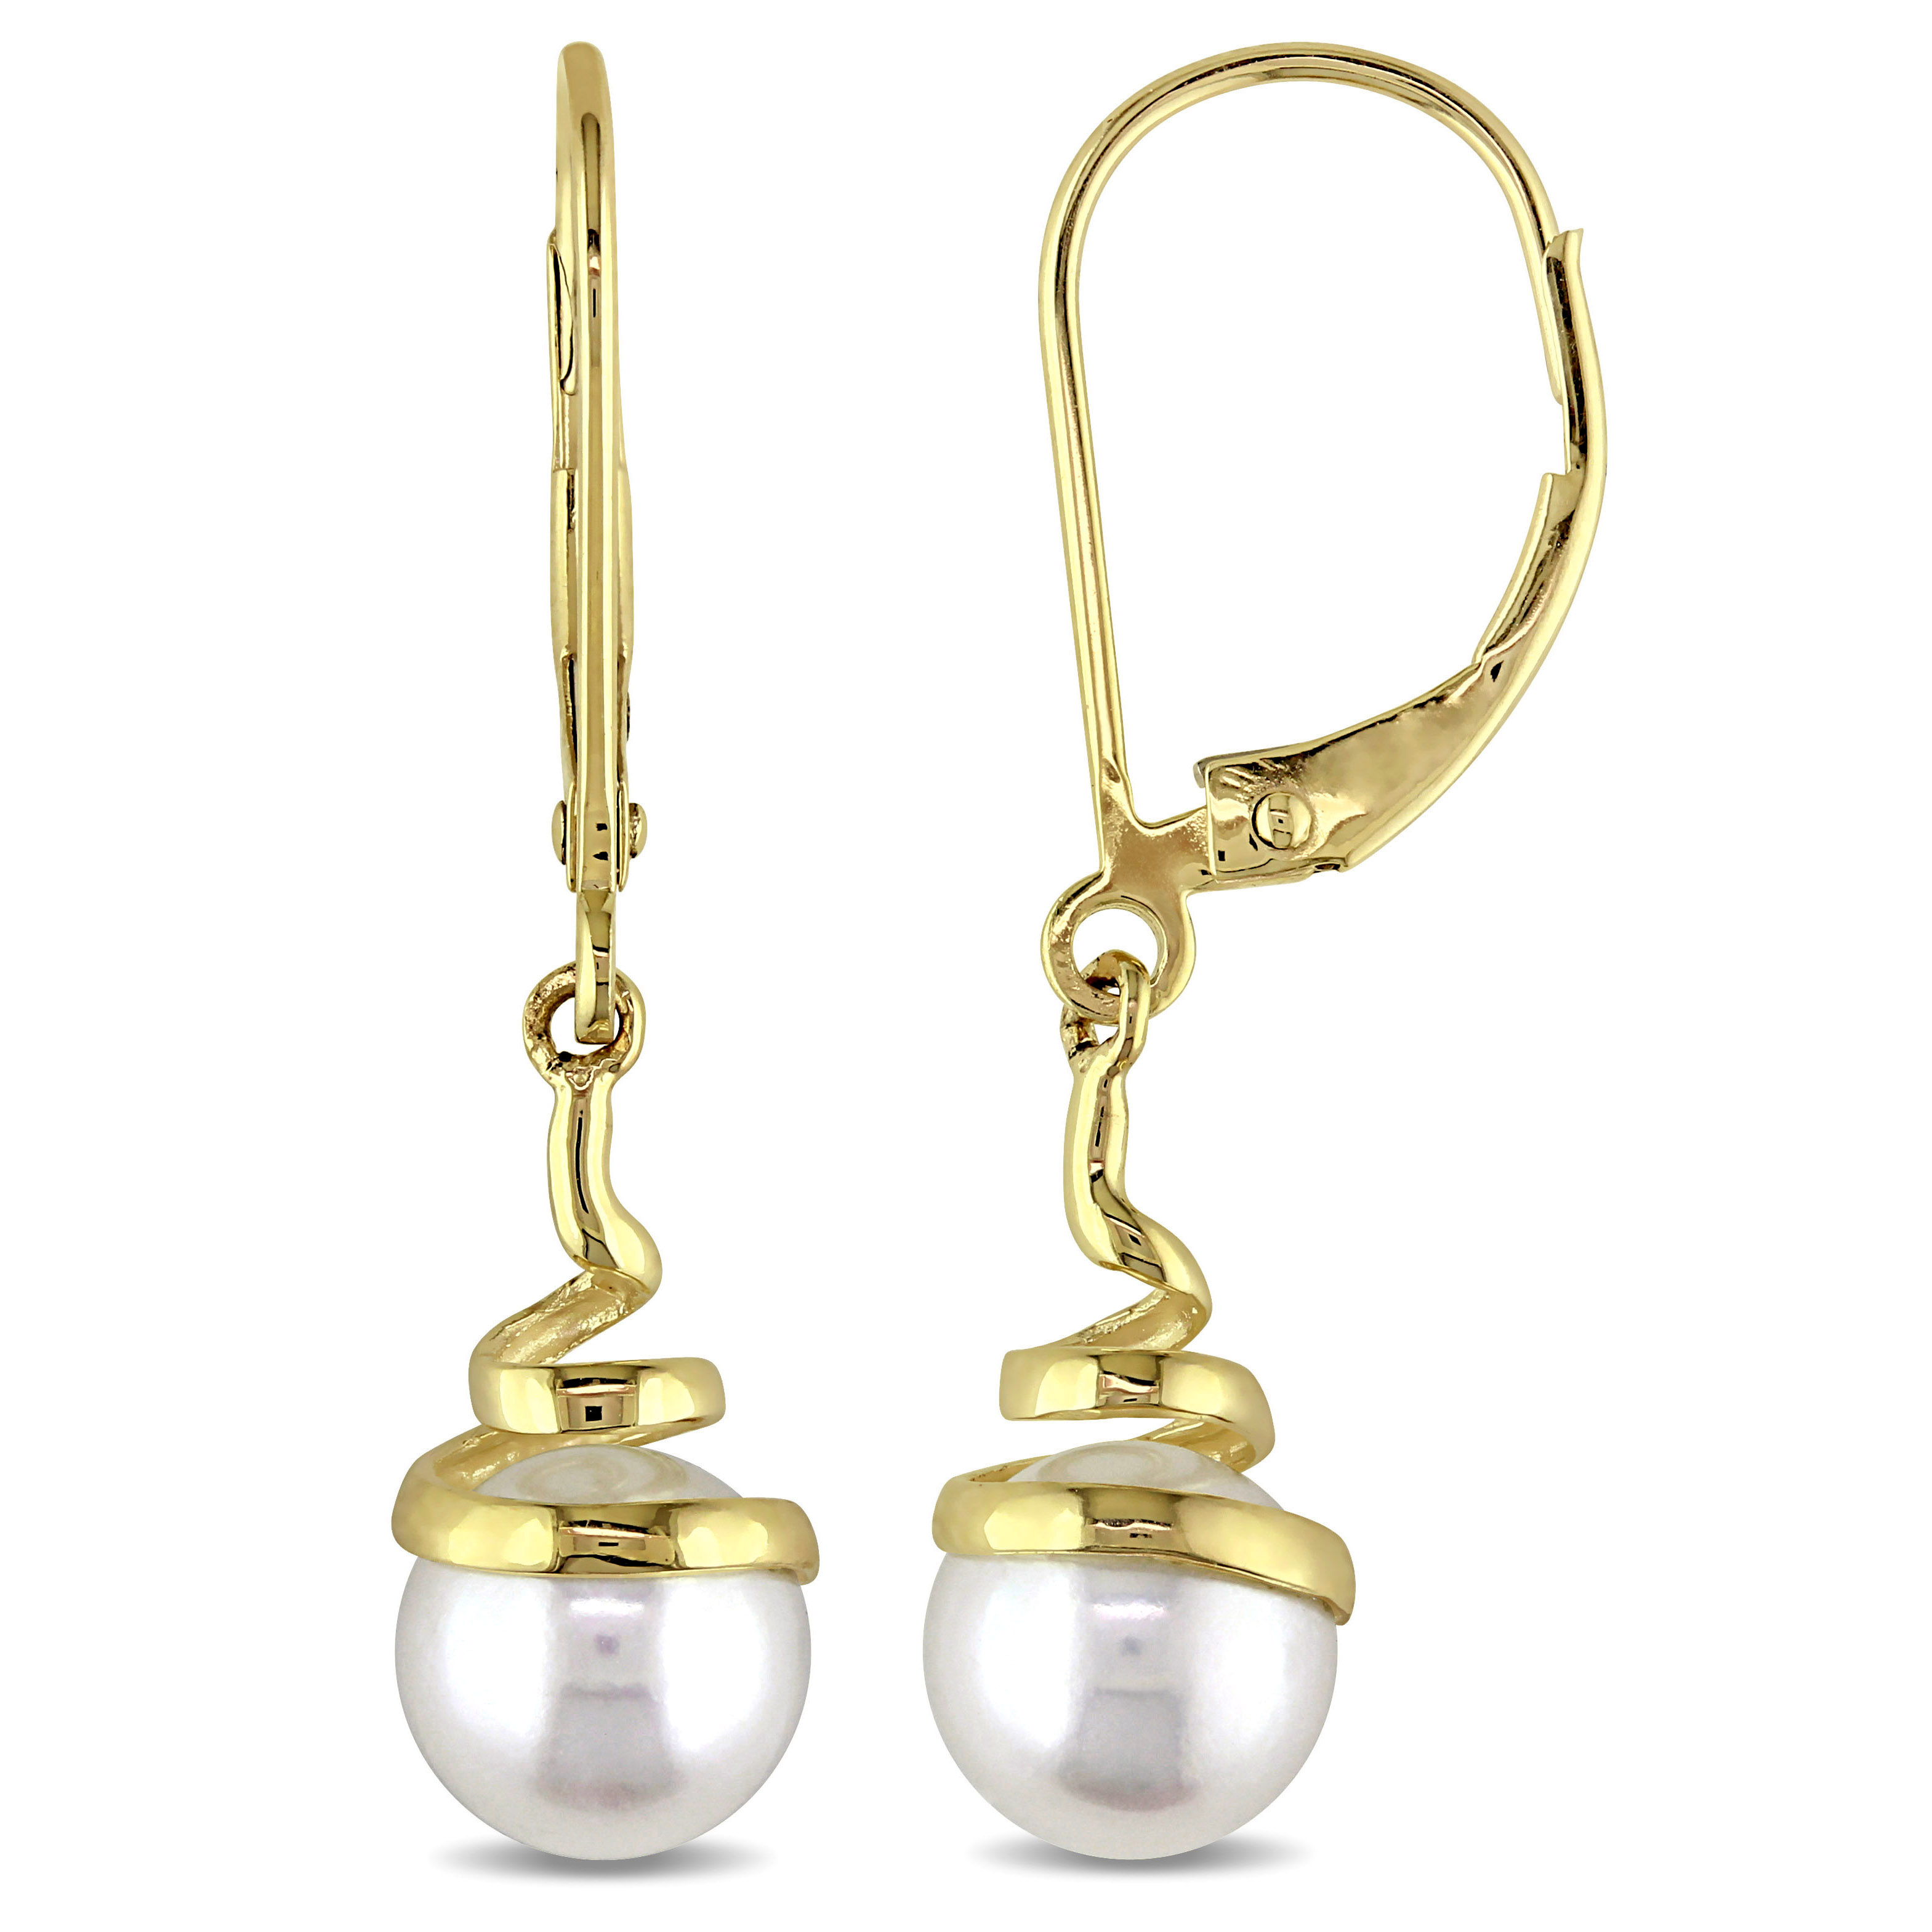 6.5 - 7 MM Cultured Freshwater Pearl Spiral Leverback Earrings in 10k Yellow Gold